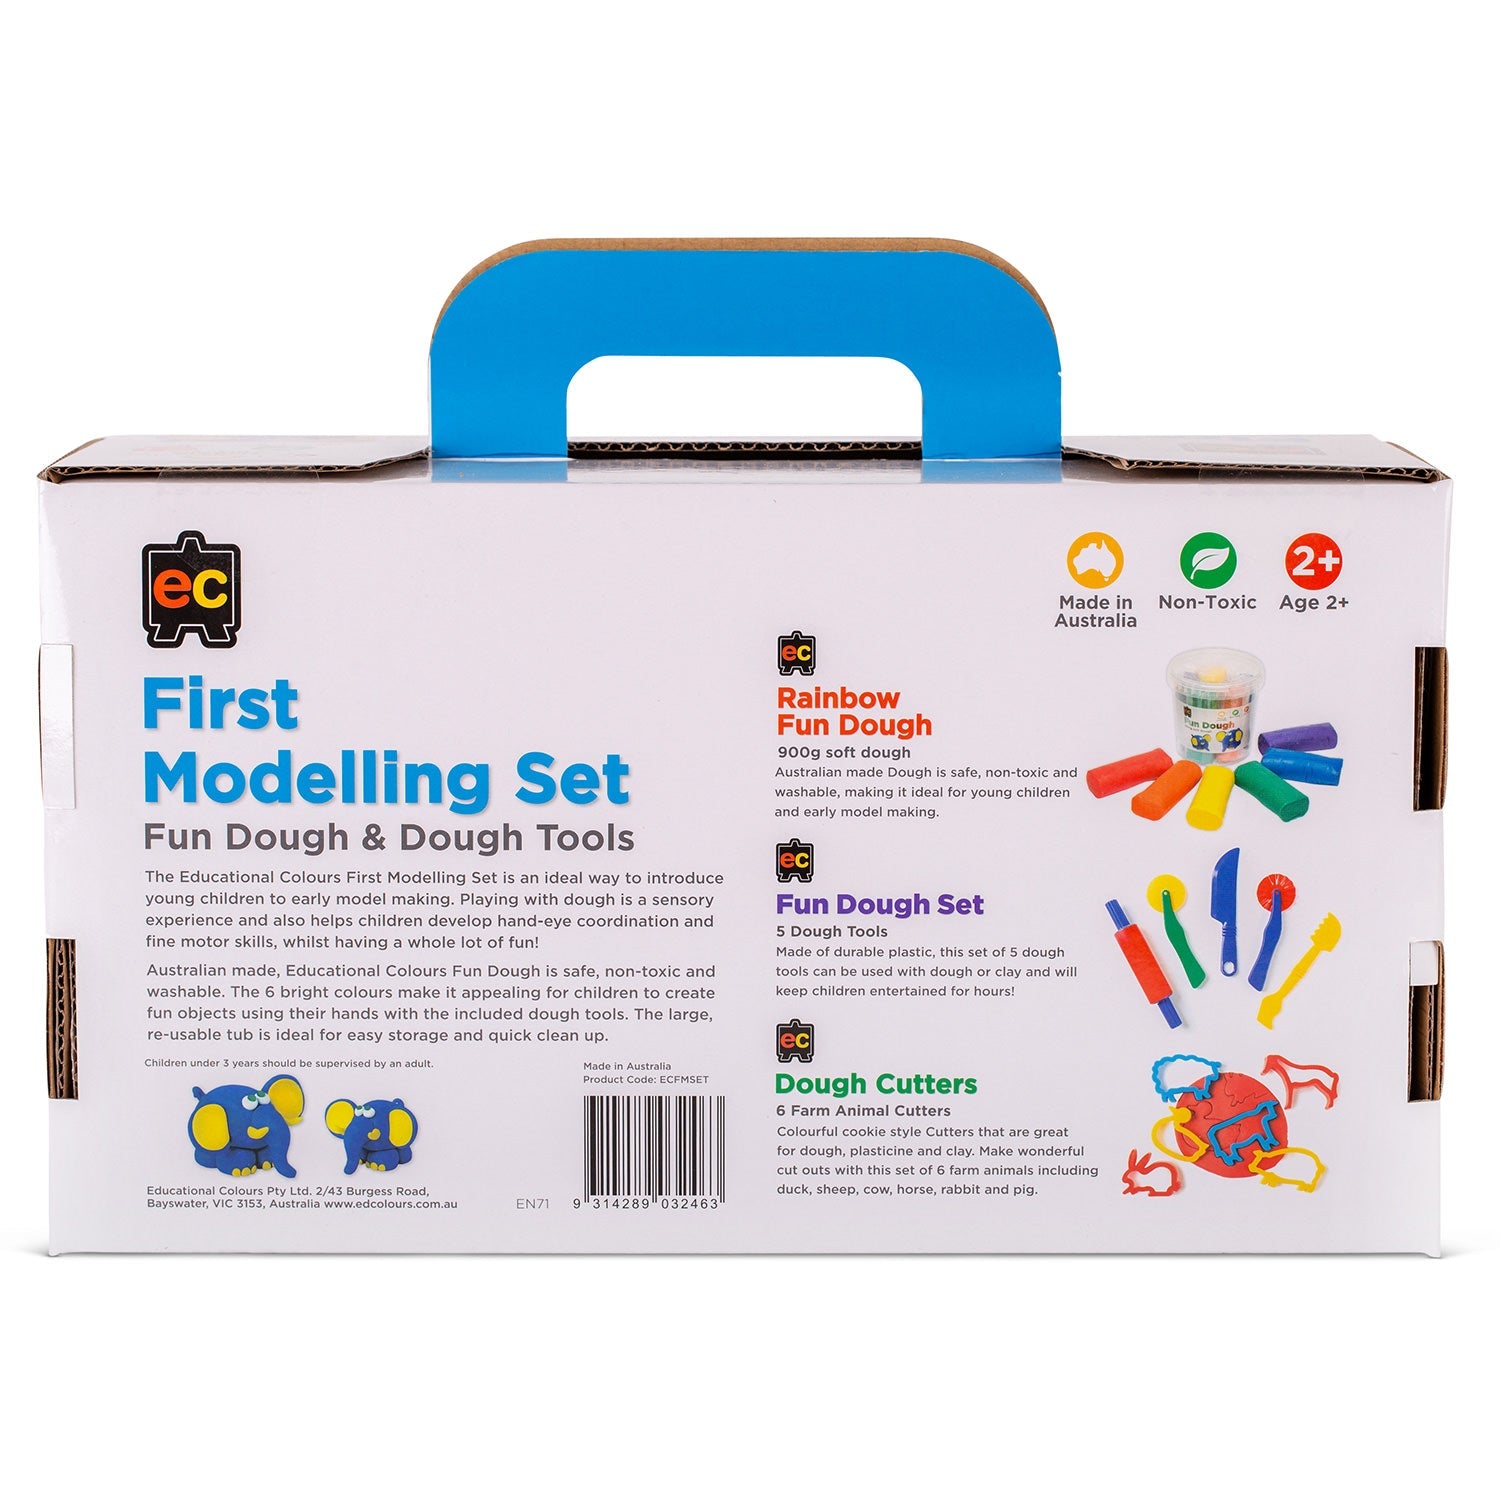 FIRST MODELLING SET by EDUCATIONAL COLOURS - The Playful Collective